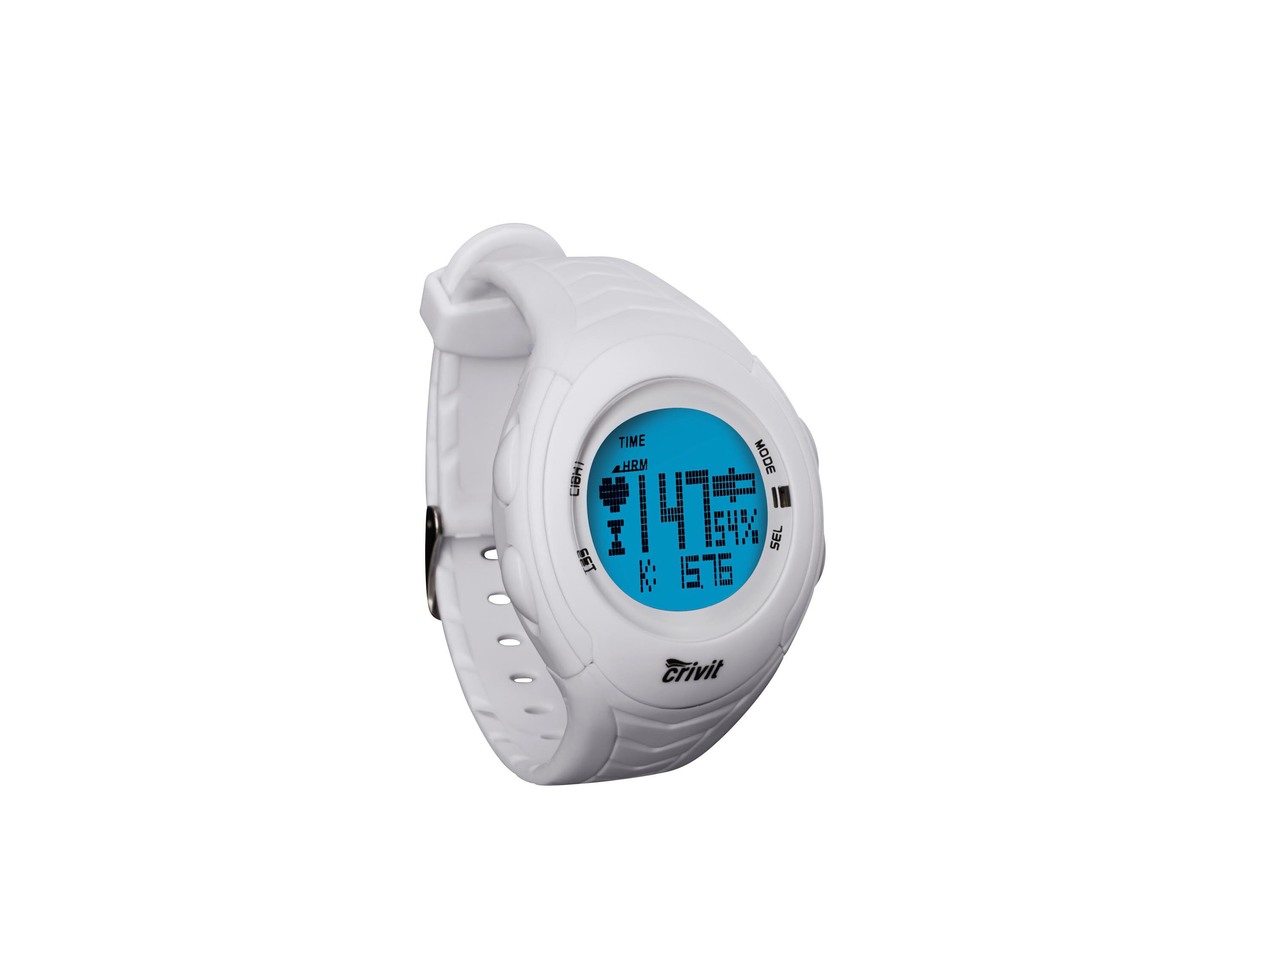 Wrist Watch with Heart Rate Monitor